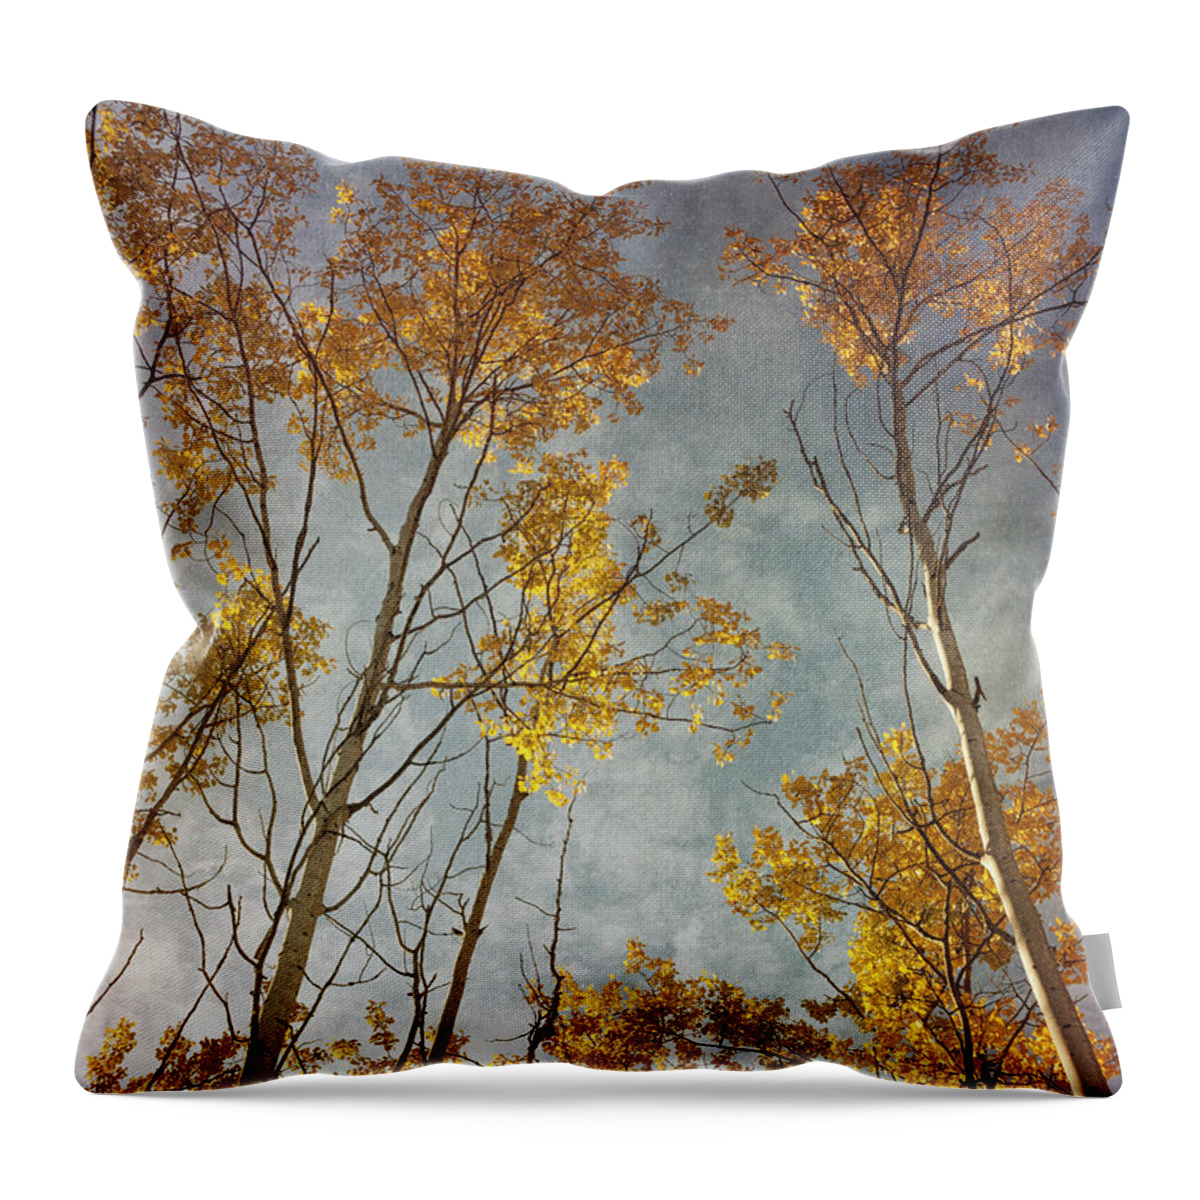 Leaves Throw Pillow featuring the photograph Sunny Leaves Tall by Priska Wettstein